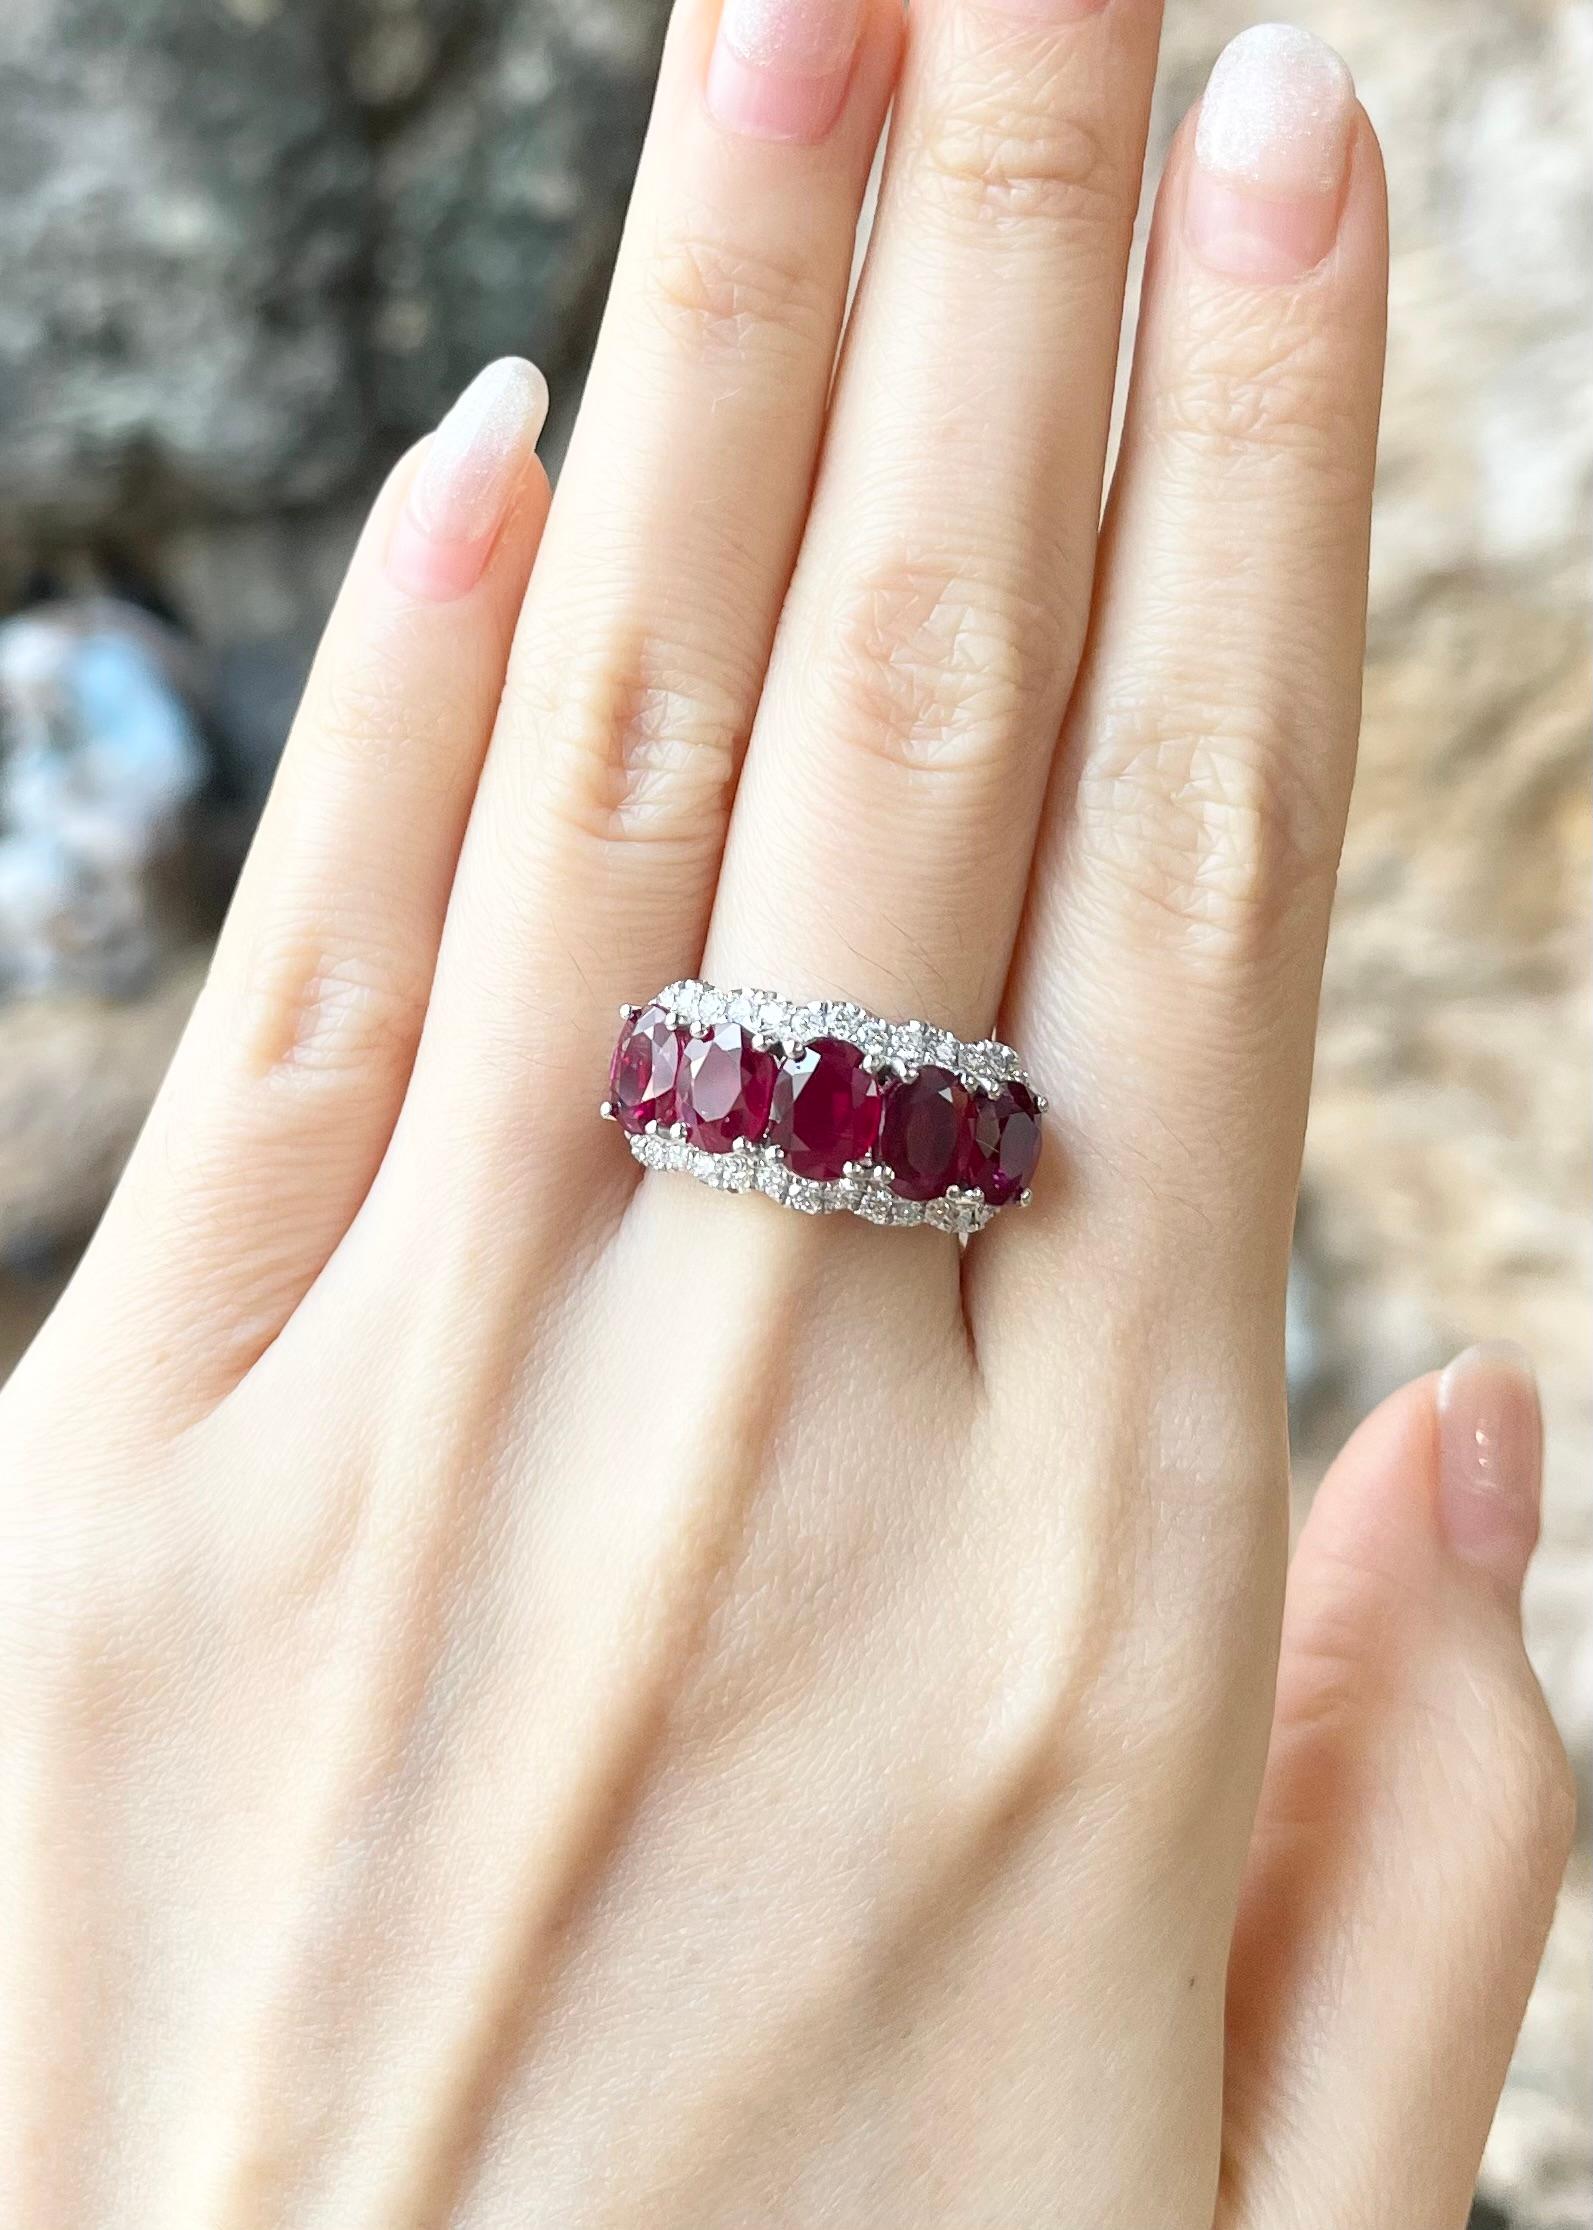 Ruby 4.24 carats with Diamond 0.56 carat Ring set in 18K White Gold Settings

Width:  2.4 cm 
Length: 1.1 cm
Ring Size: 54
Total Weight: 7.98 grams

